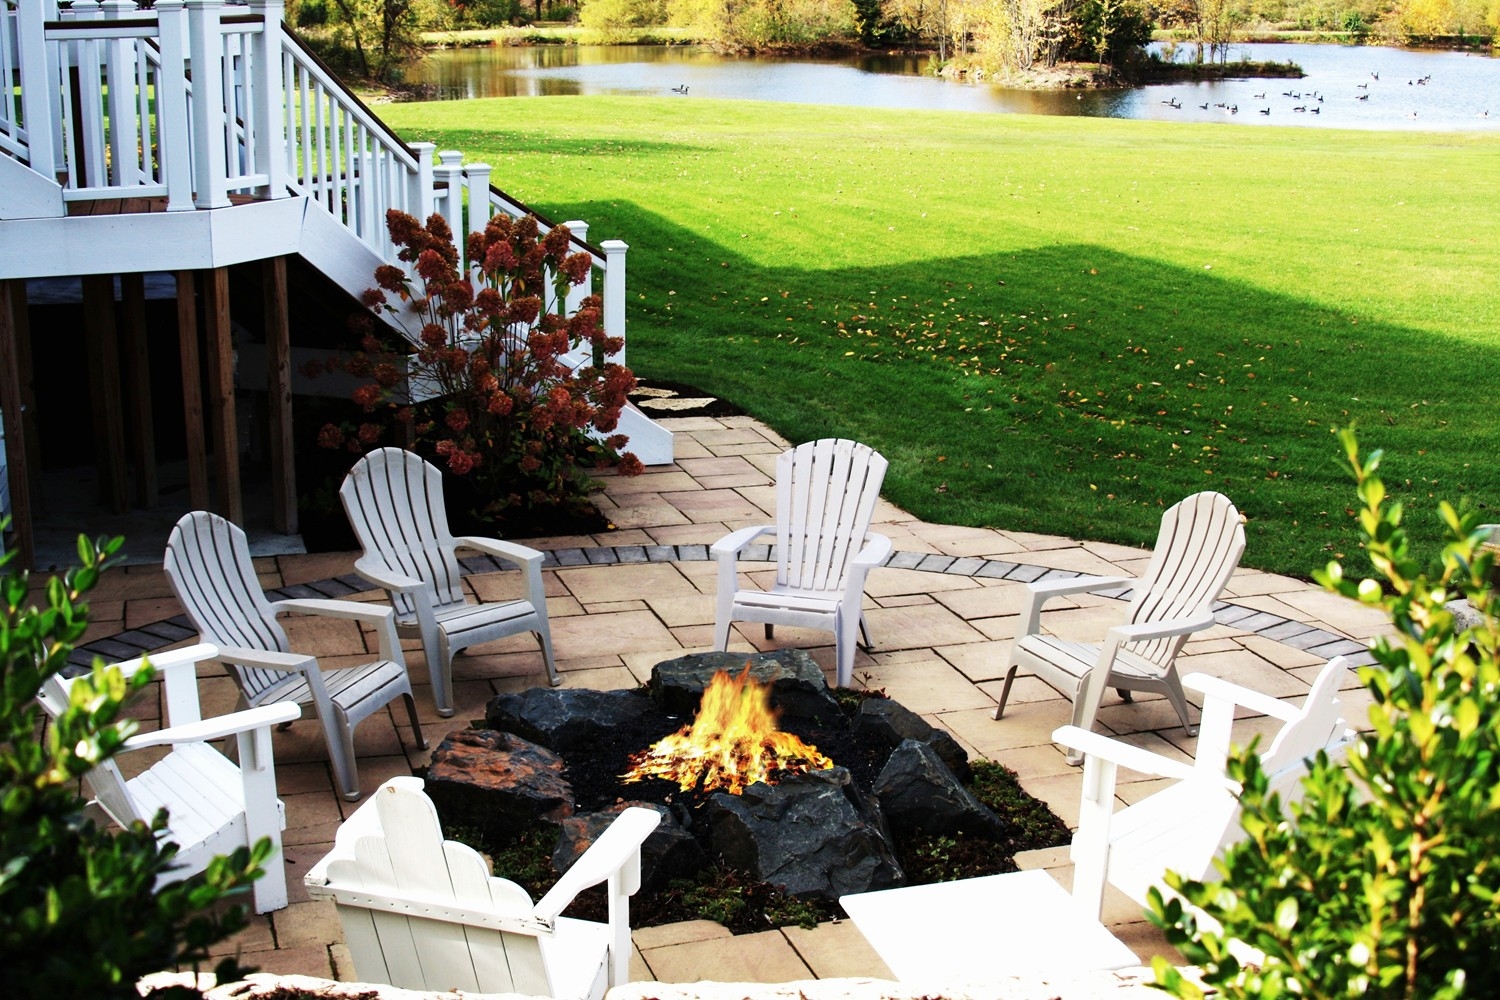 Professional Yard Clean Up Services in Grand Rapids MI - ProMow Landscape